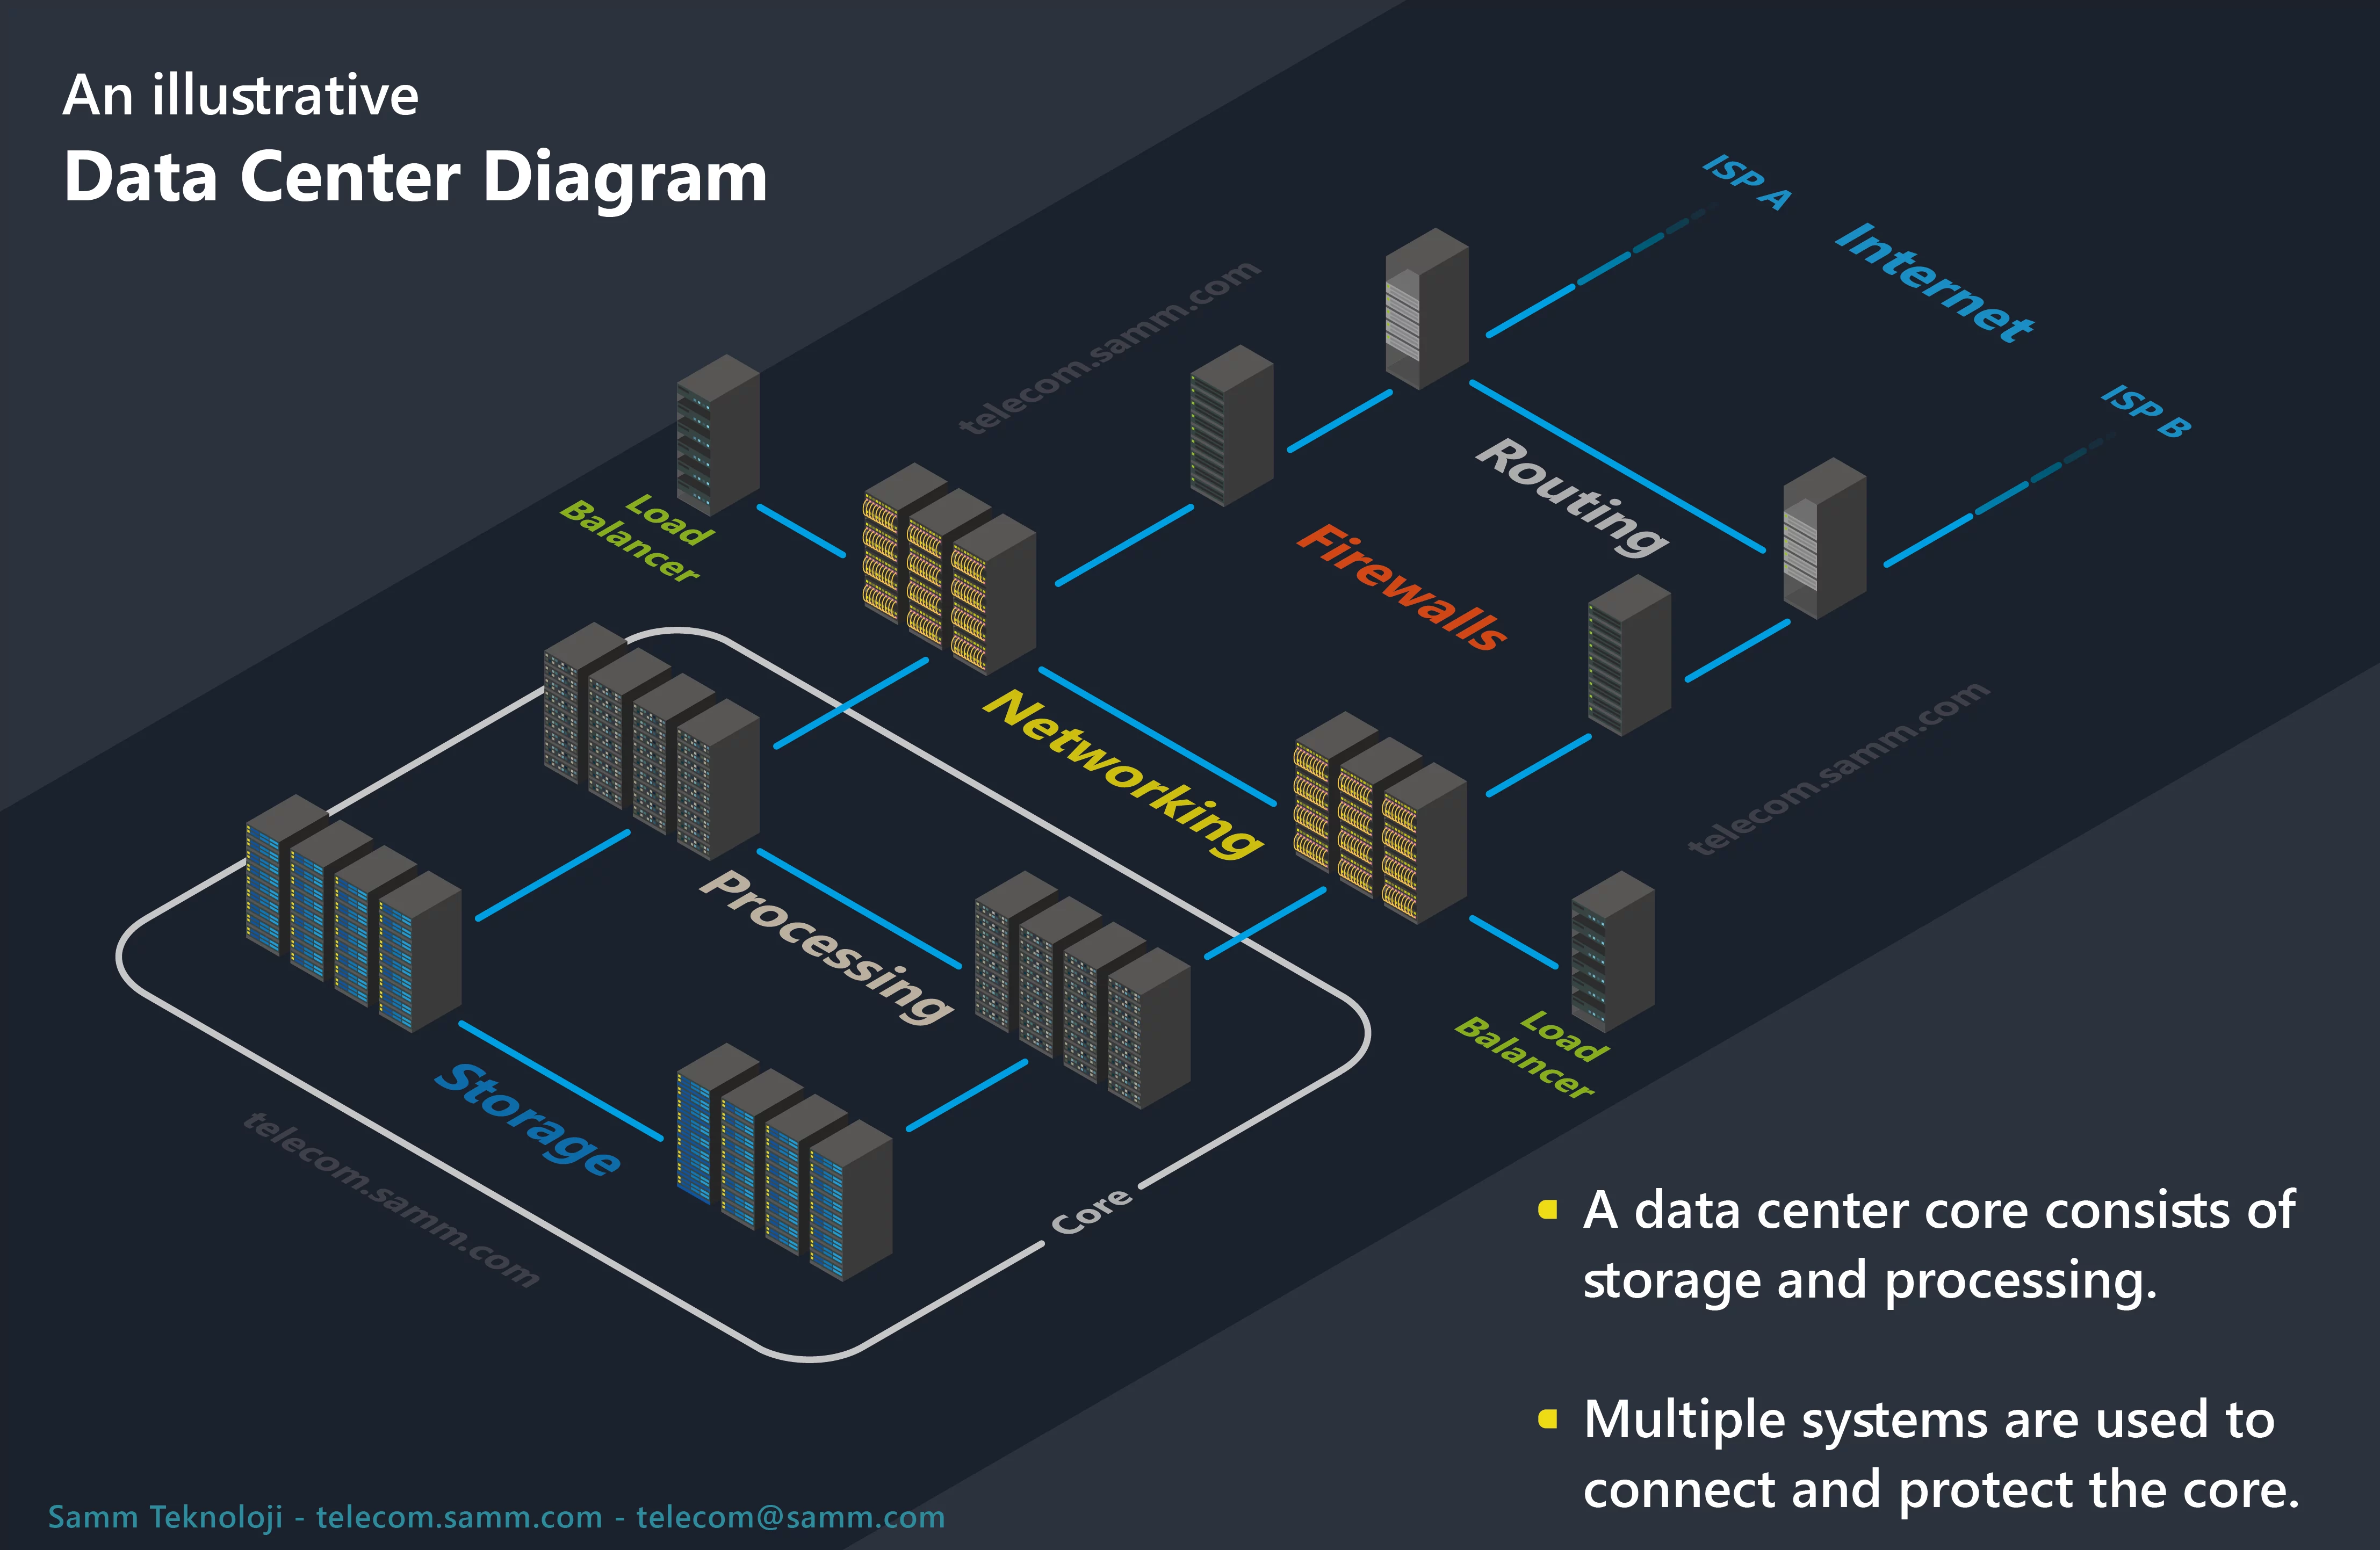 What is a Data Center? What are the main components of a data center?